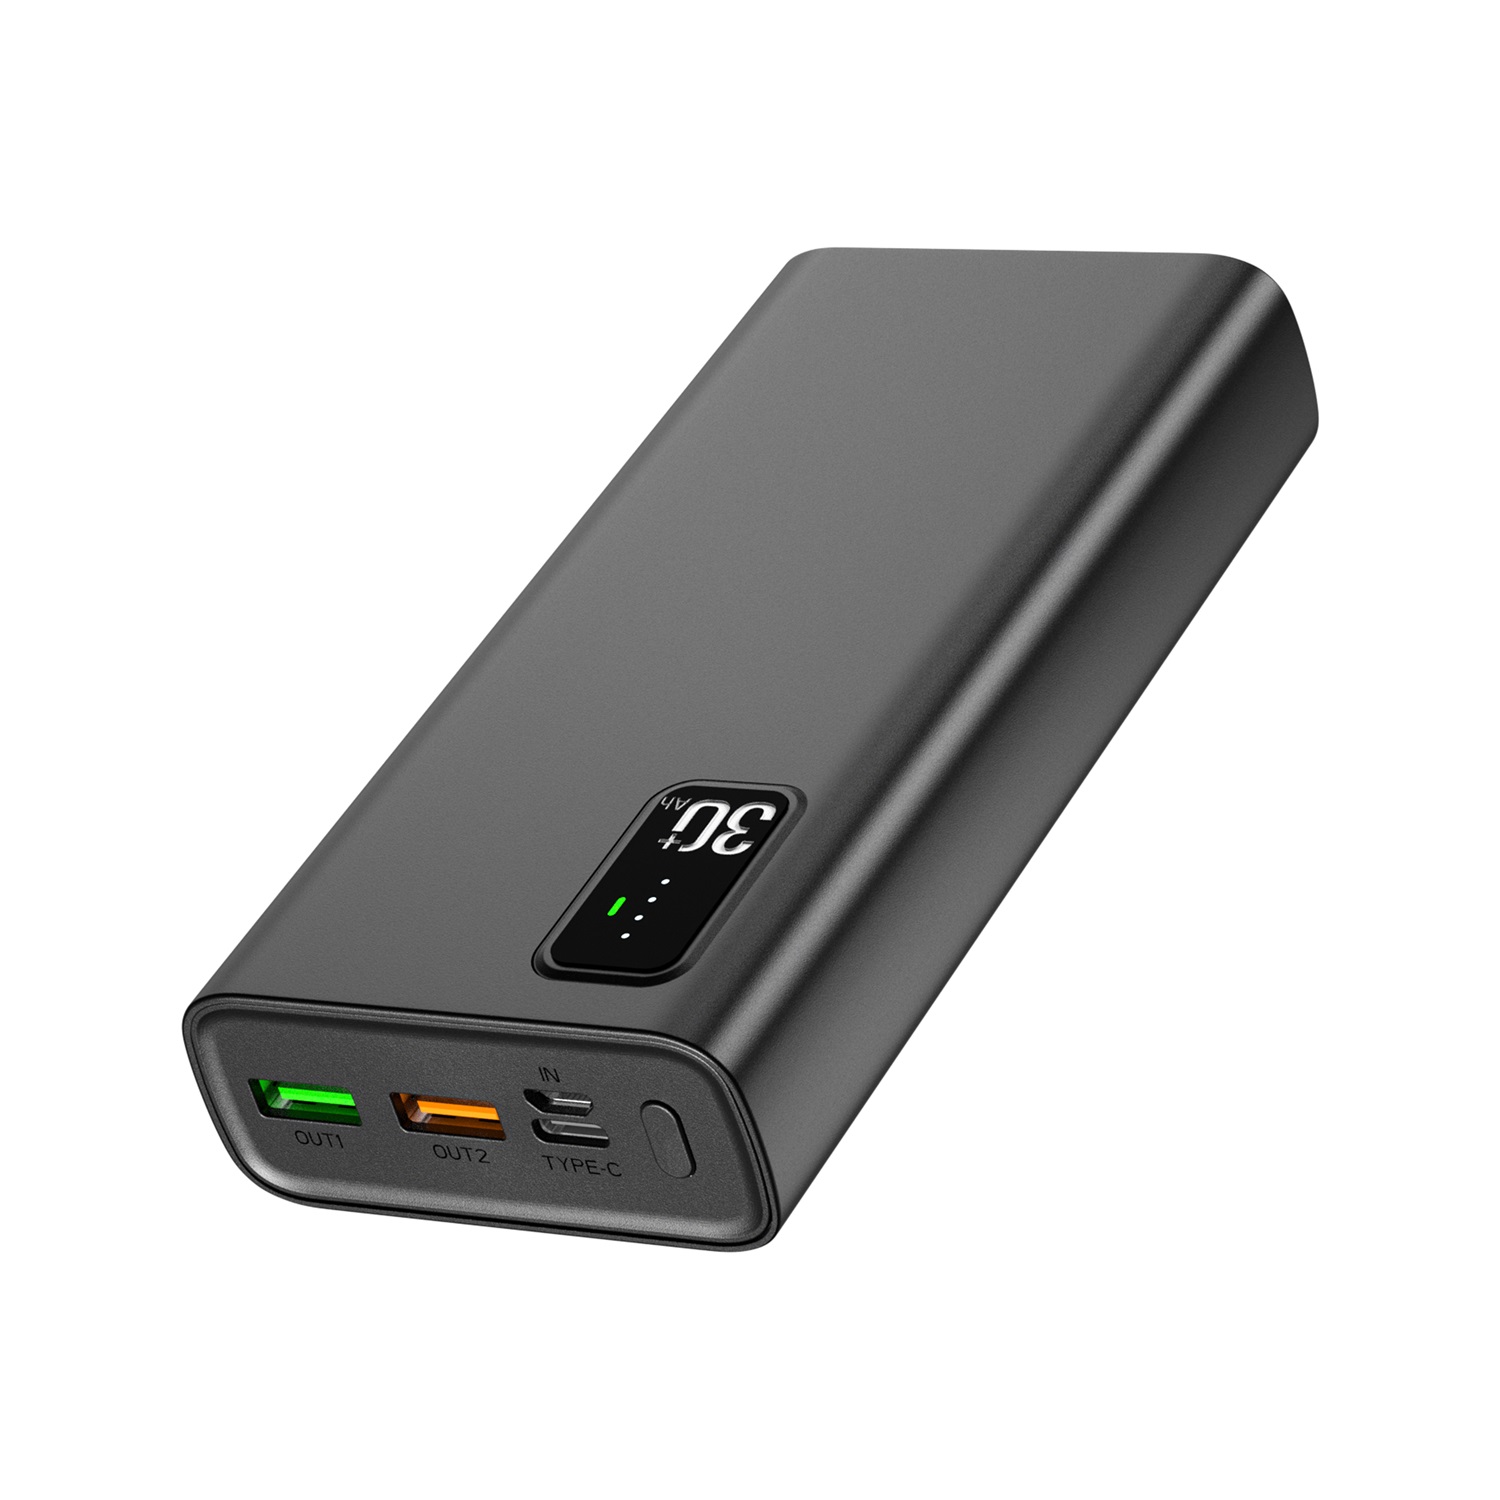 Toospon- Power Bank, 26800mAh Fast Charging, QC3.0 22.5W & USB C PD20W, Portable Charger, External Battery Pack, 2 Inputs and 3 Outputs(USB & Type C) For iphone, ipad, Samsung, Huawei, Smartphones etc.